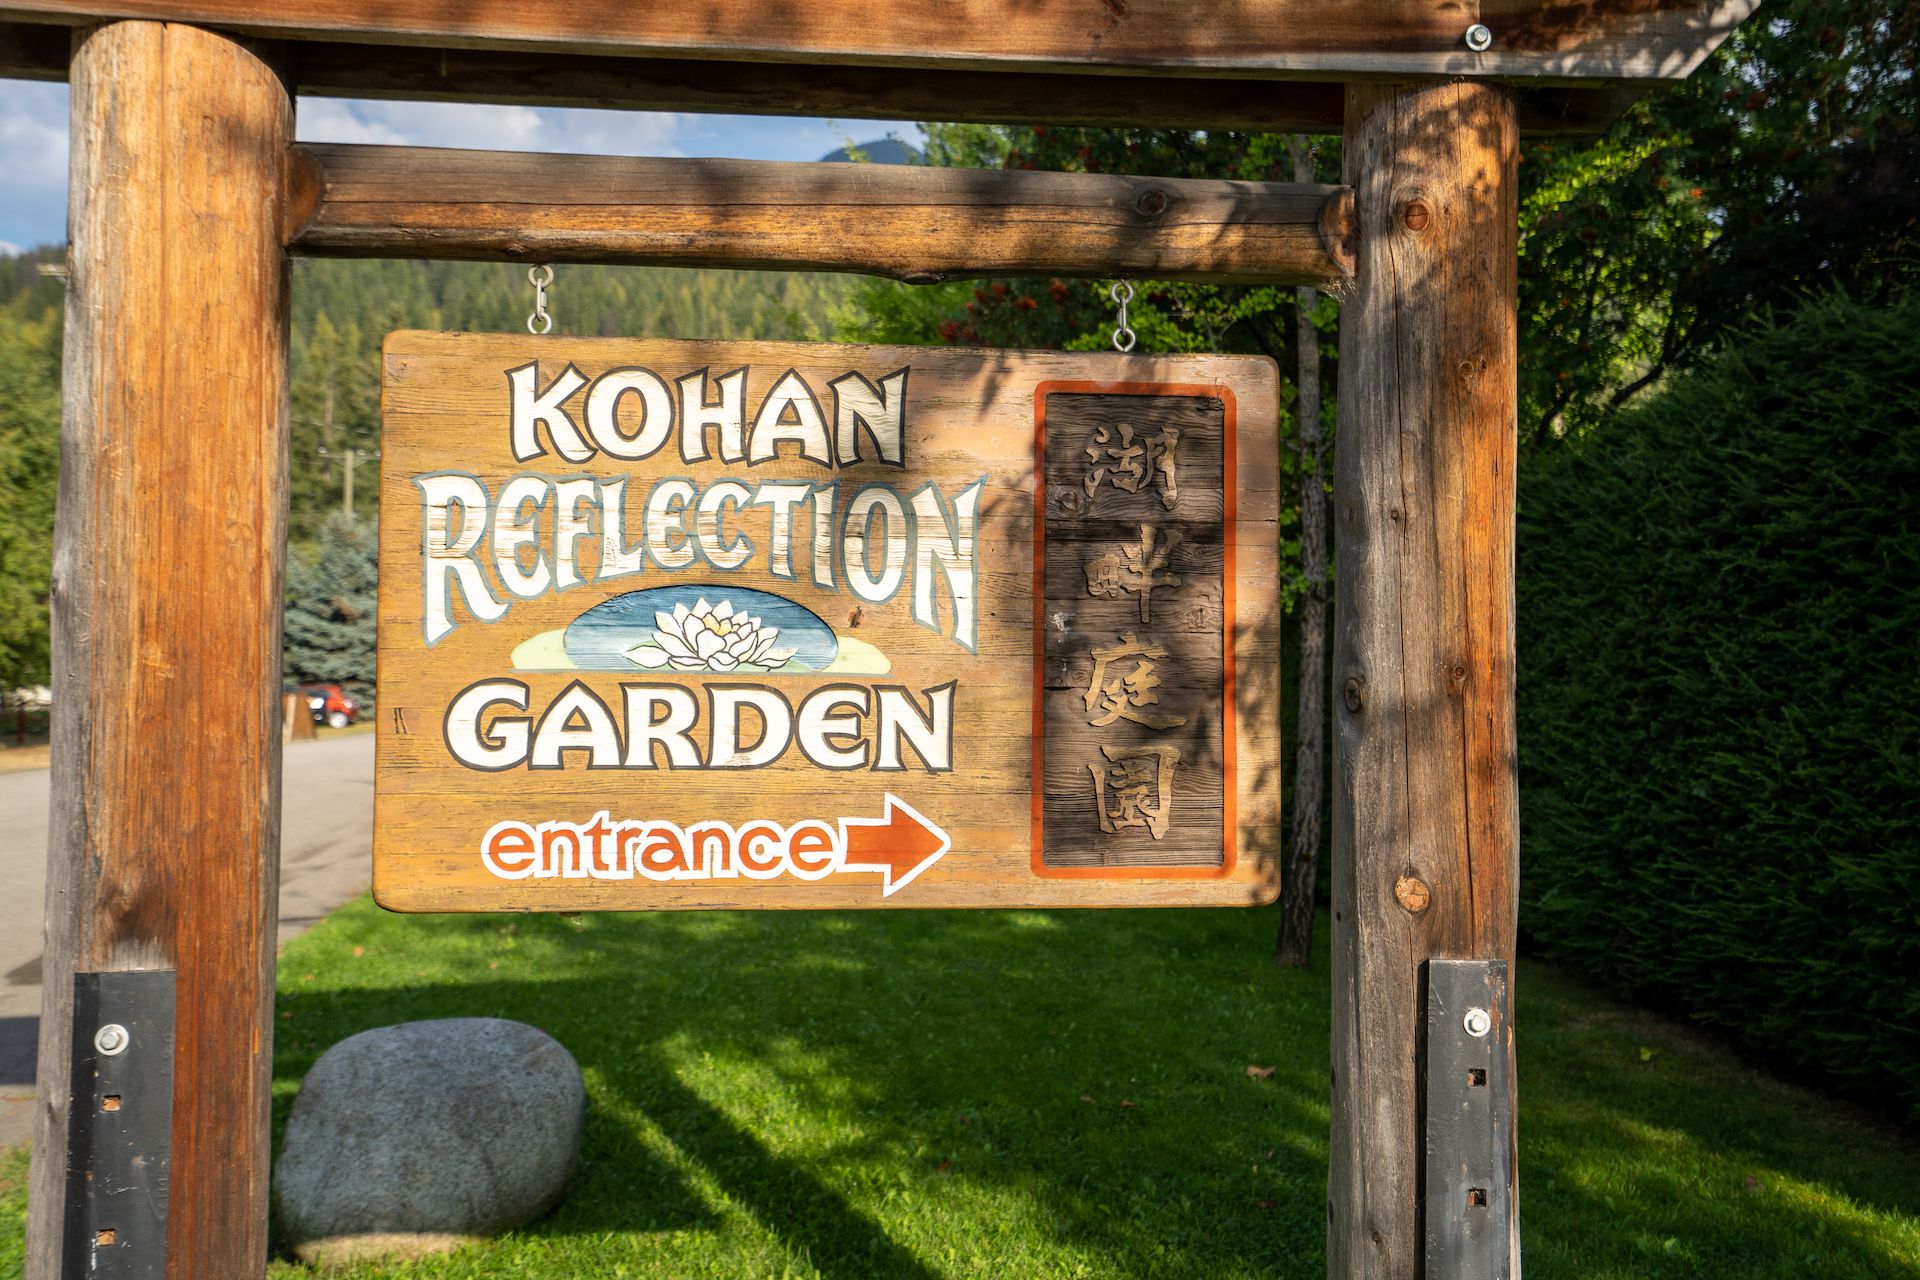 The Kohan Reflection Garden is a beautiful public Japanese-style garden near the Nikkei Museum that honors the Japanese Canadians relocated to the BC Interior.